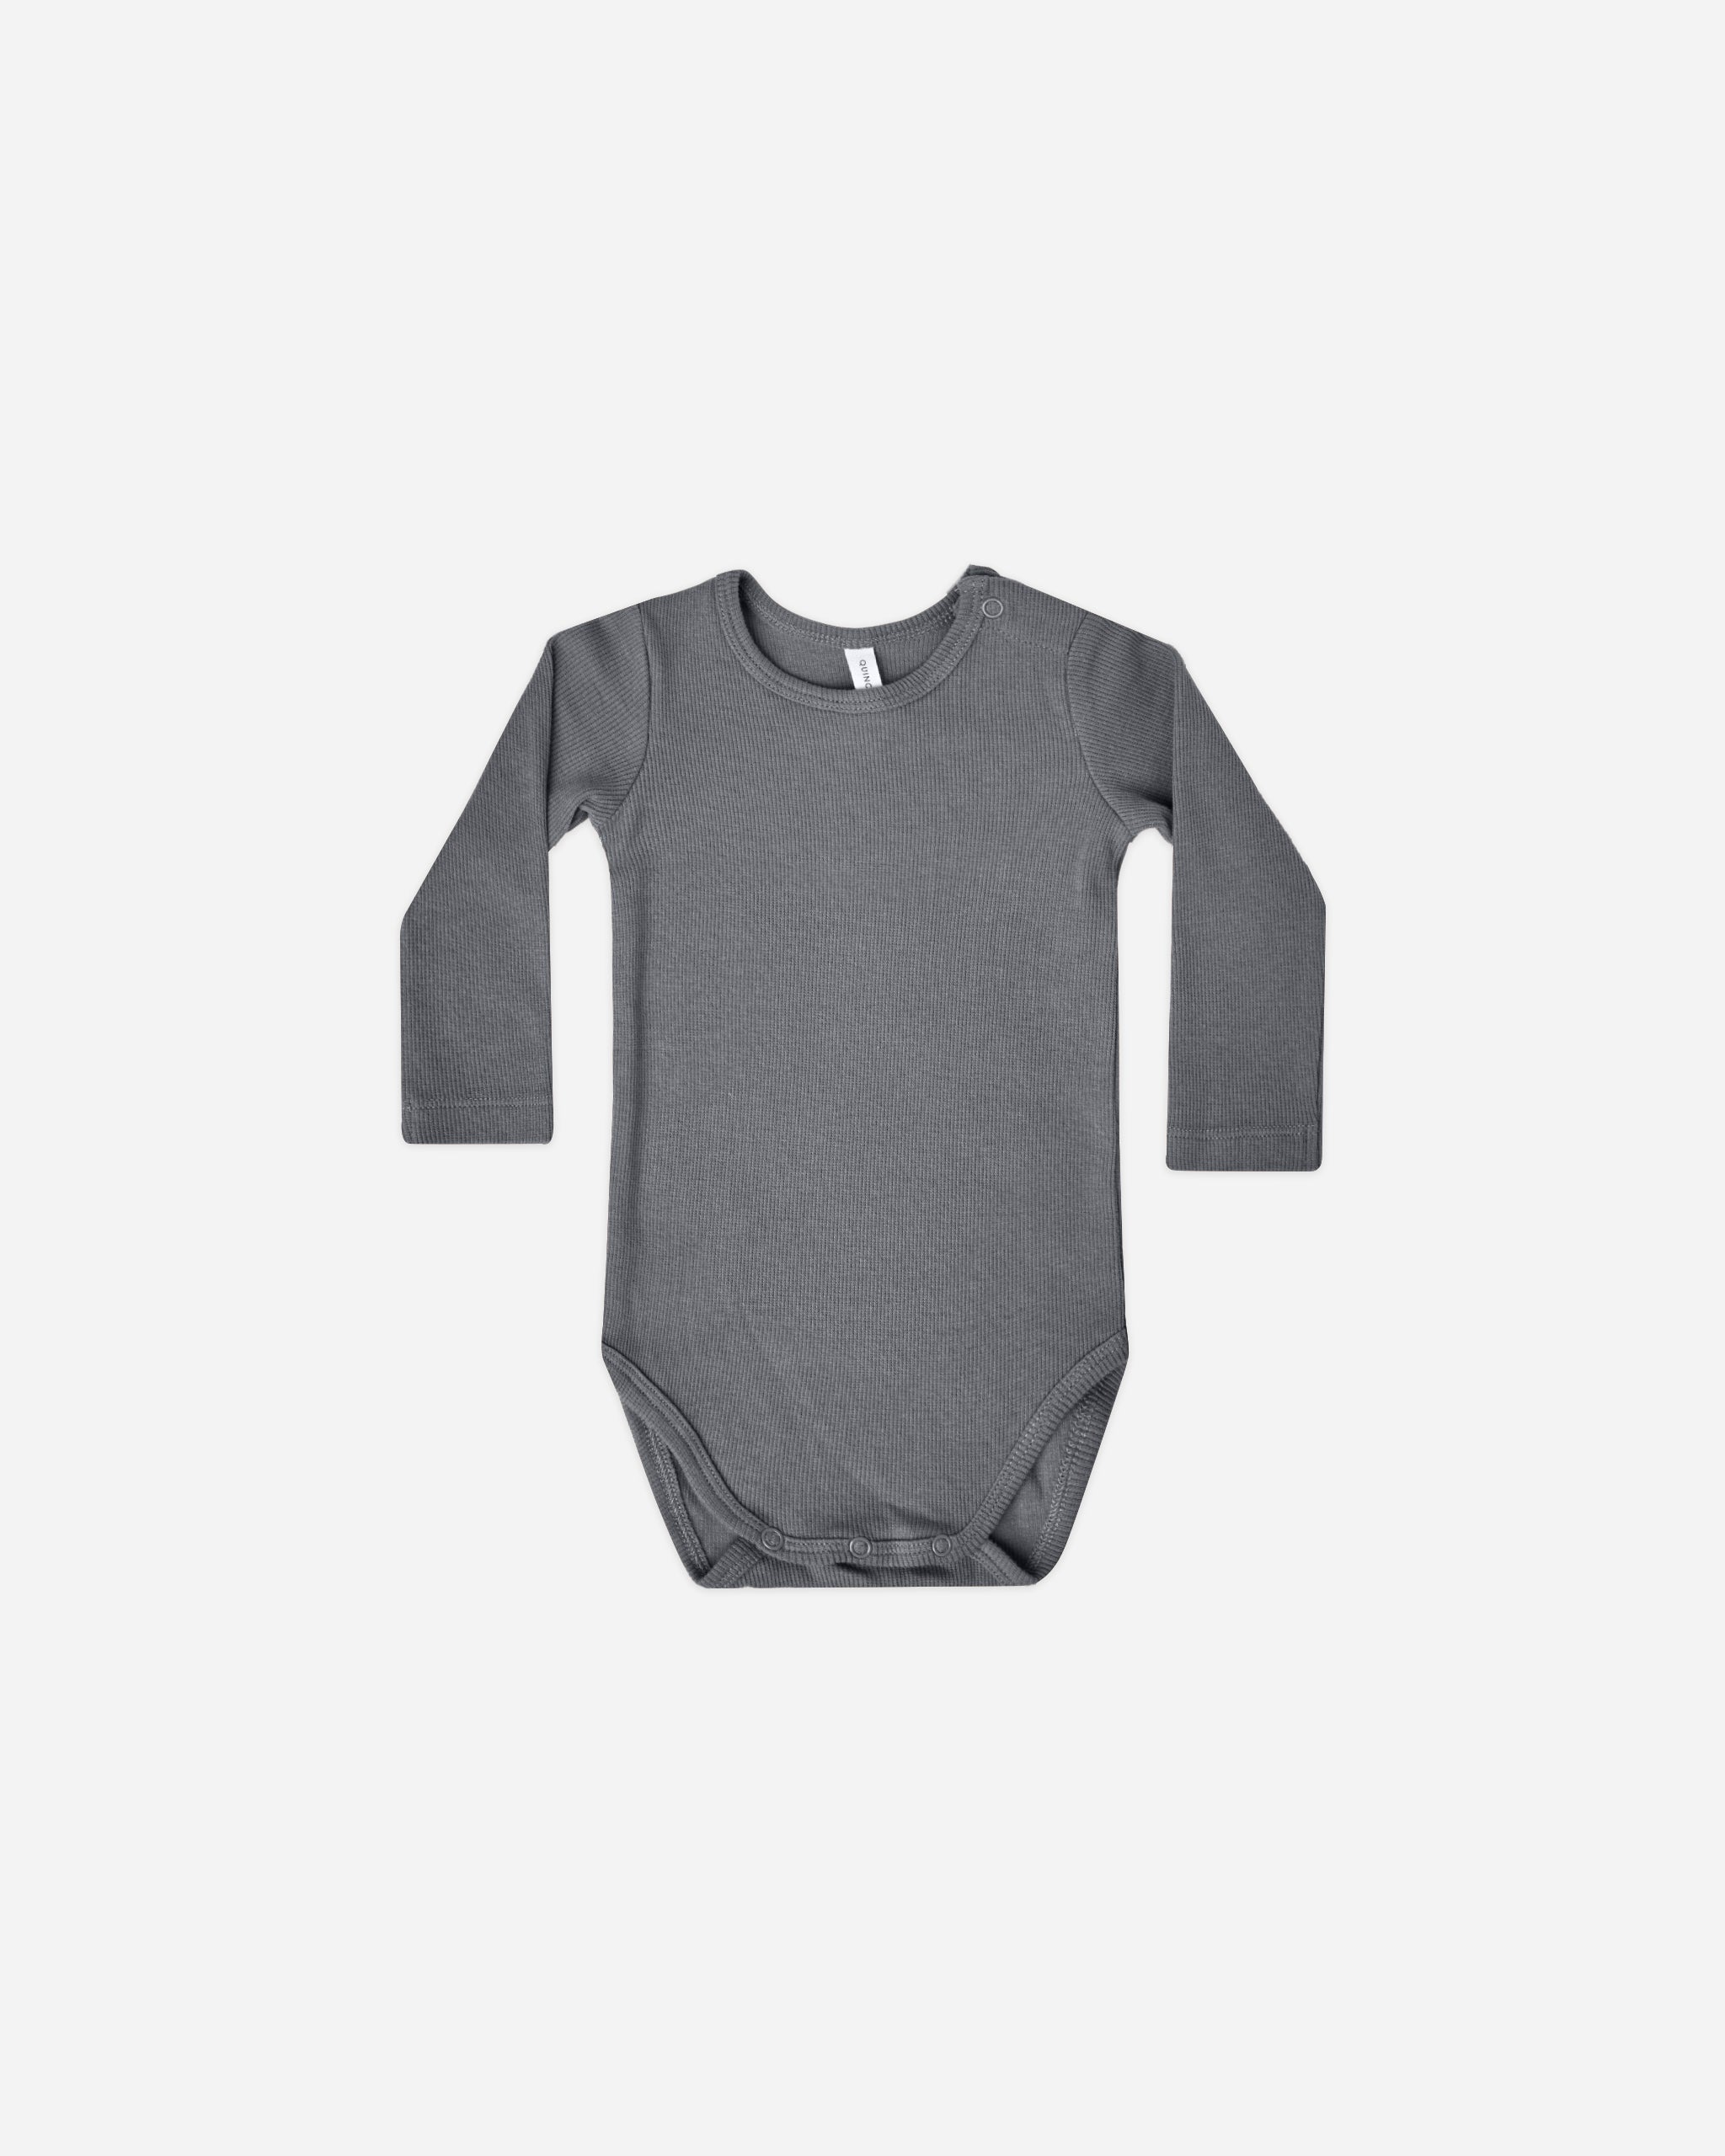 Ribbed Long Sleeve Bodysuit || Navy - Rylee + Cru | Kids Clothes | Trendy Baby Clothes | Modern Infant Outfits |